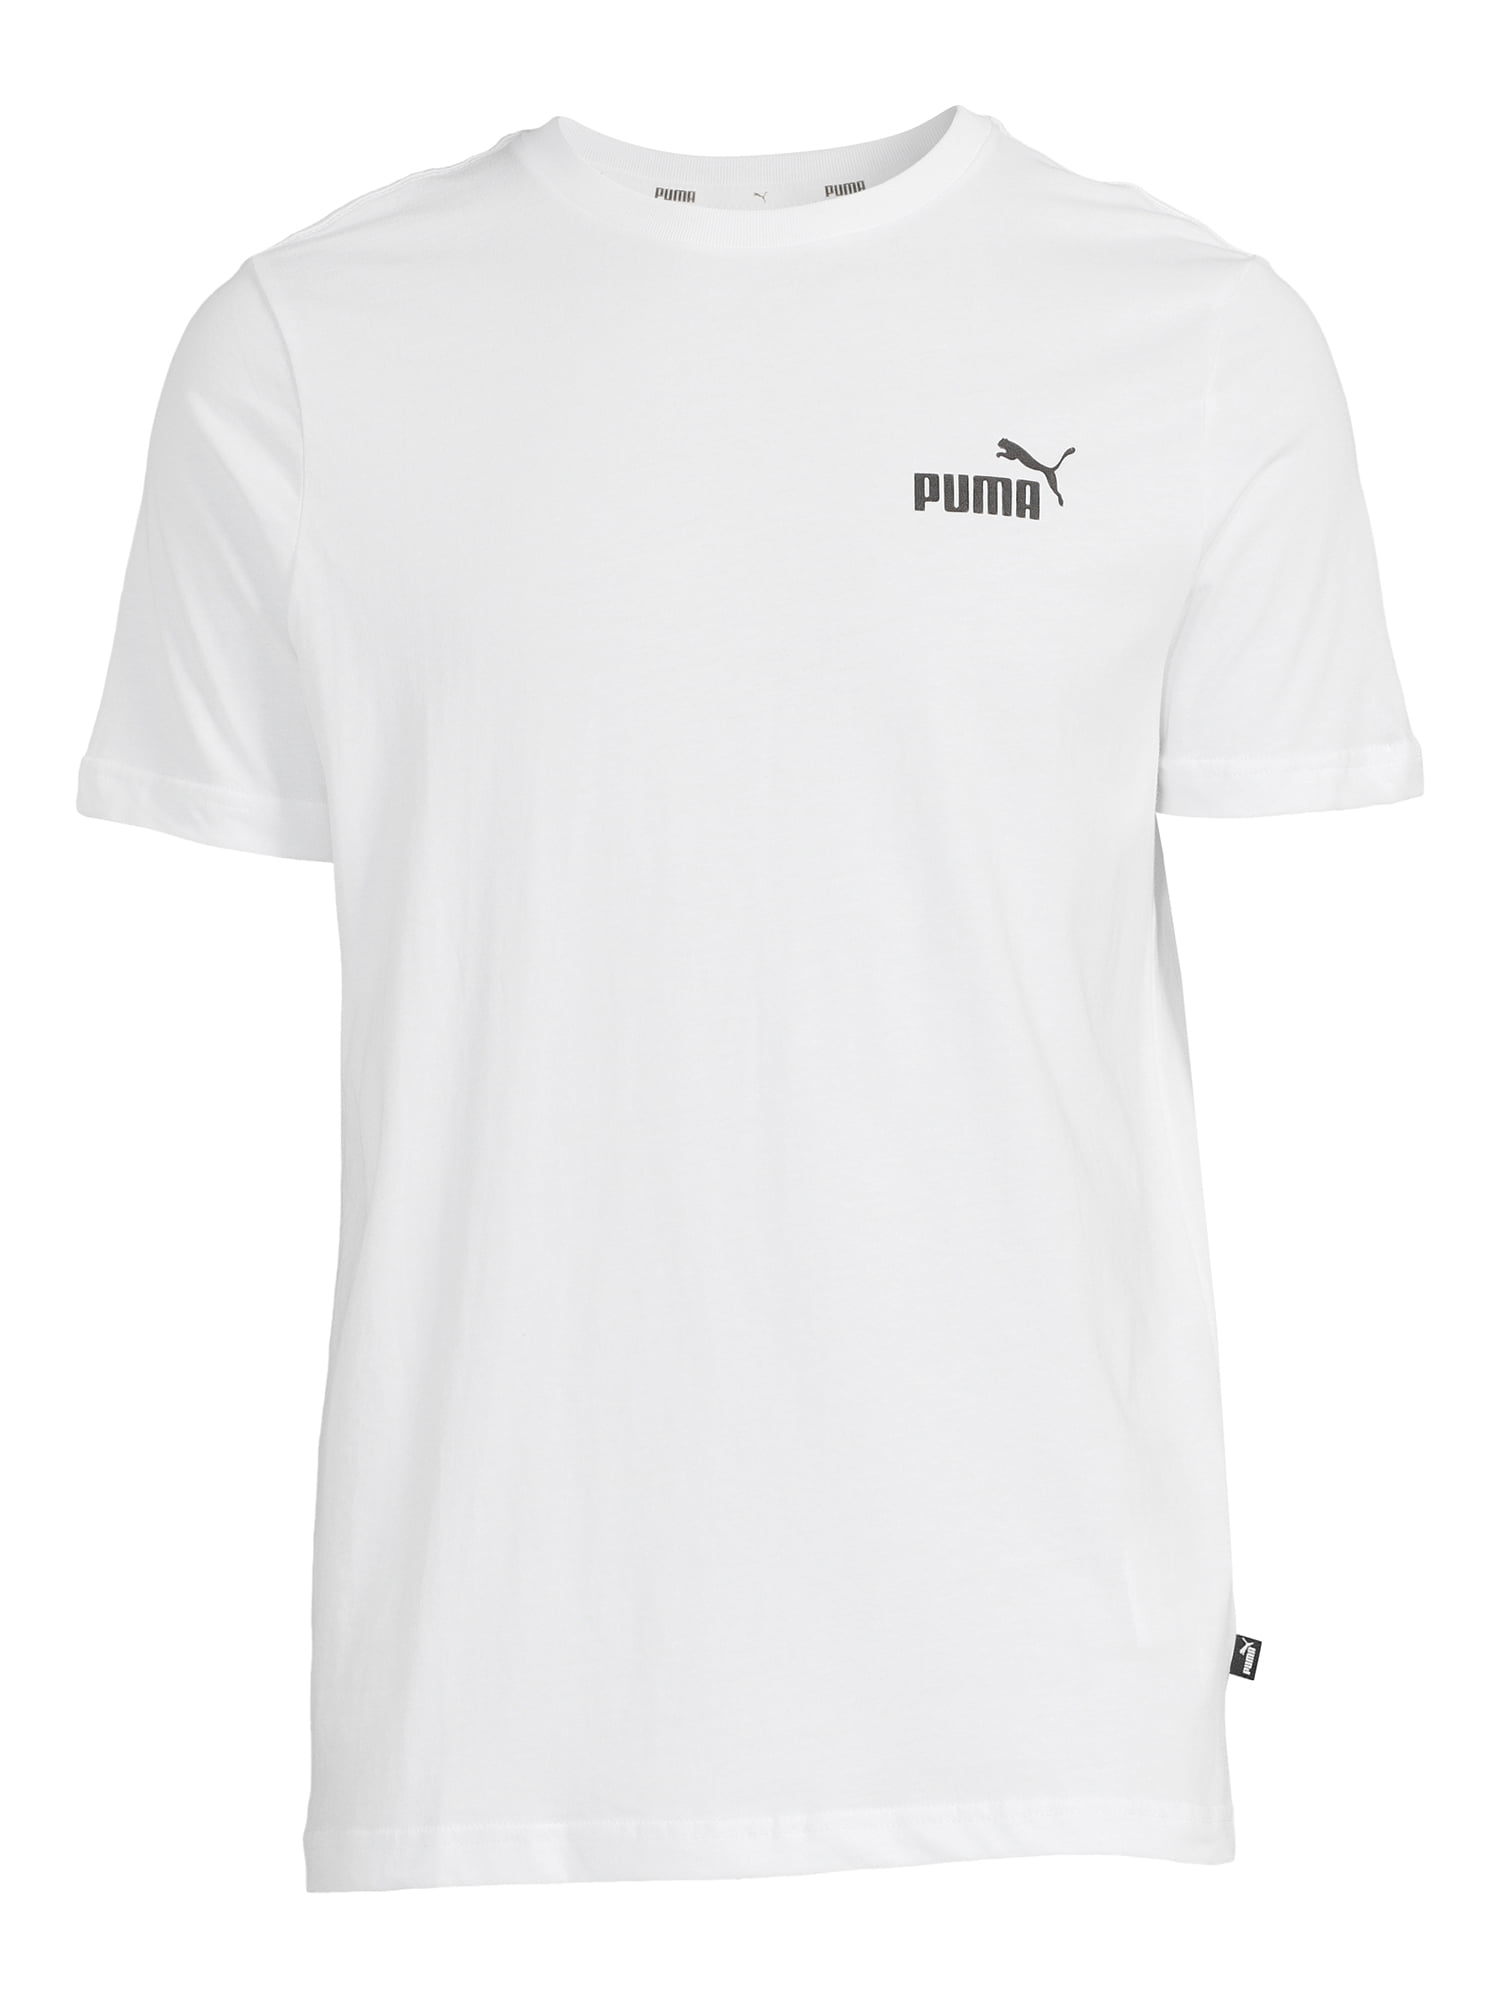 Essential sizes S Big Shirt, Logo 2XL Tee and to PUMA Men\'s Men\'s Chest